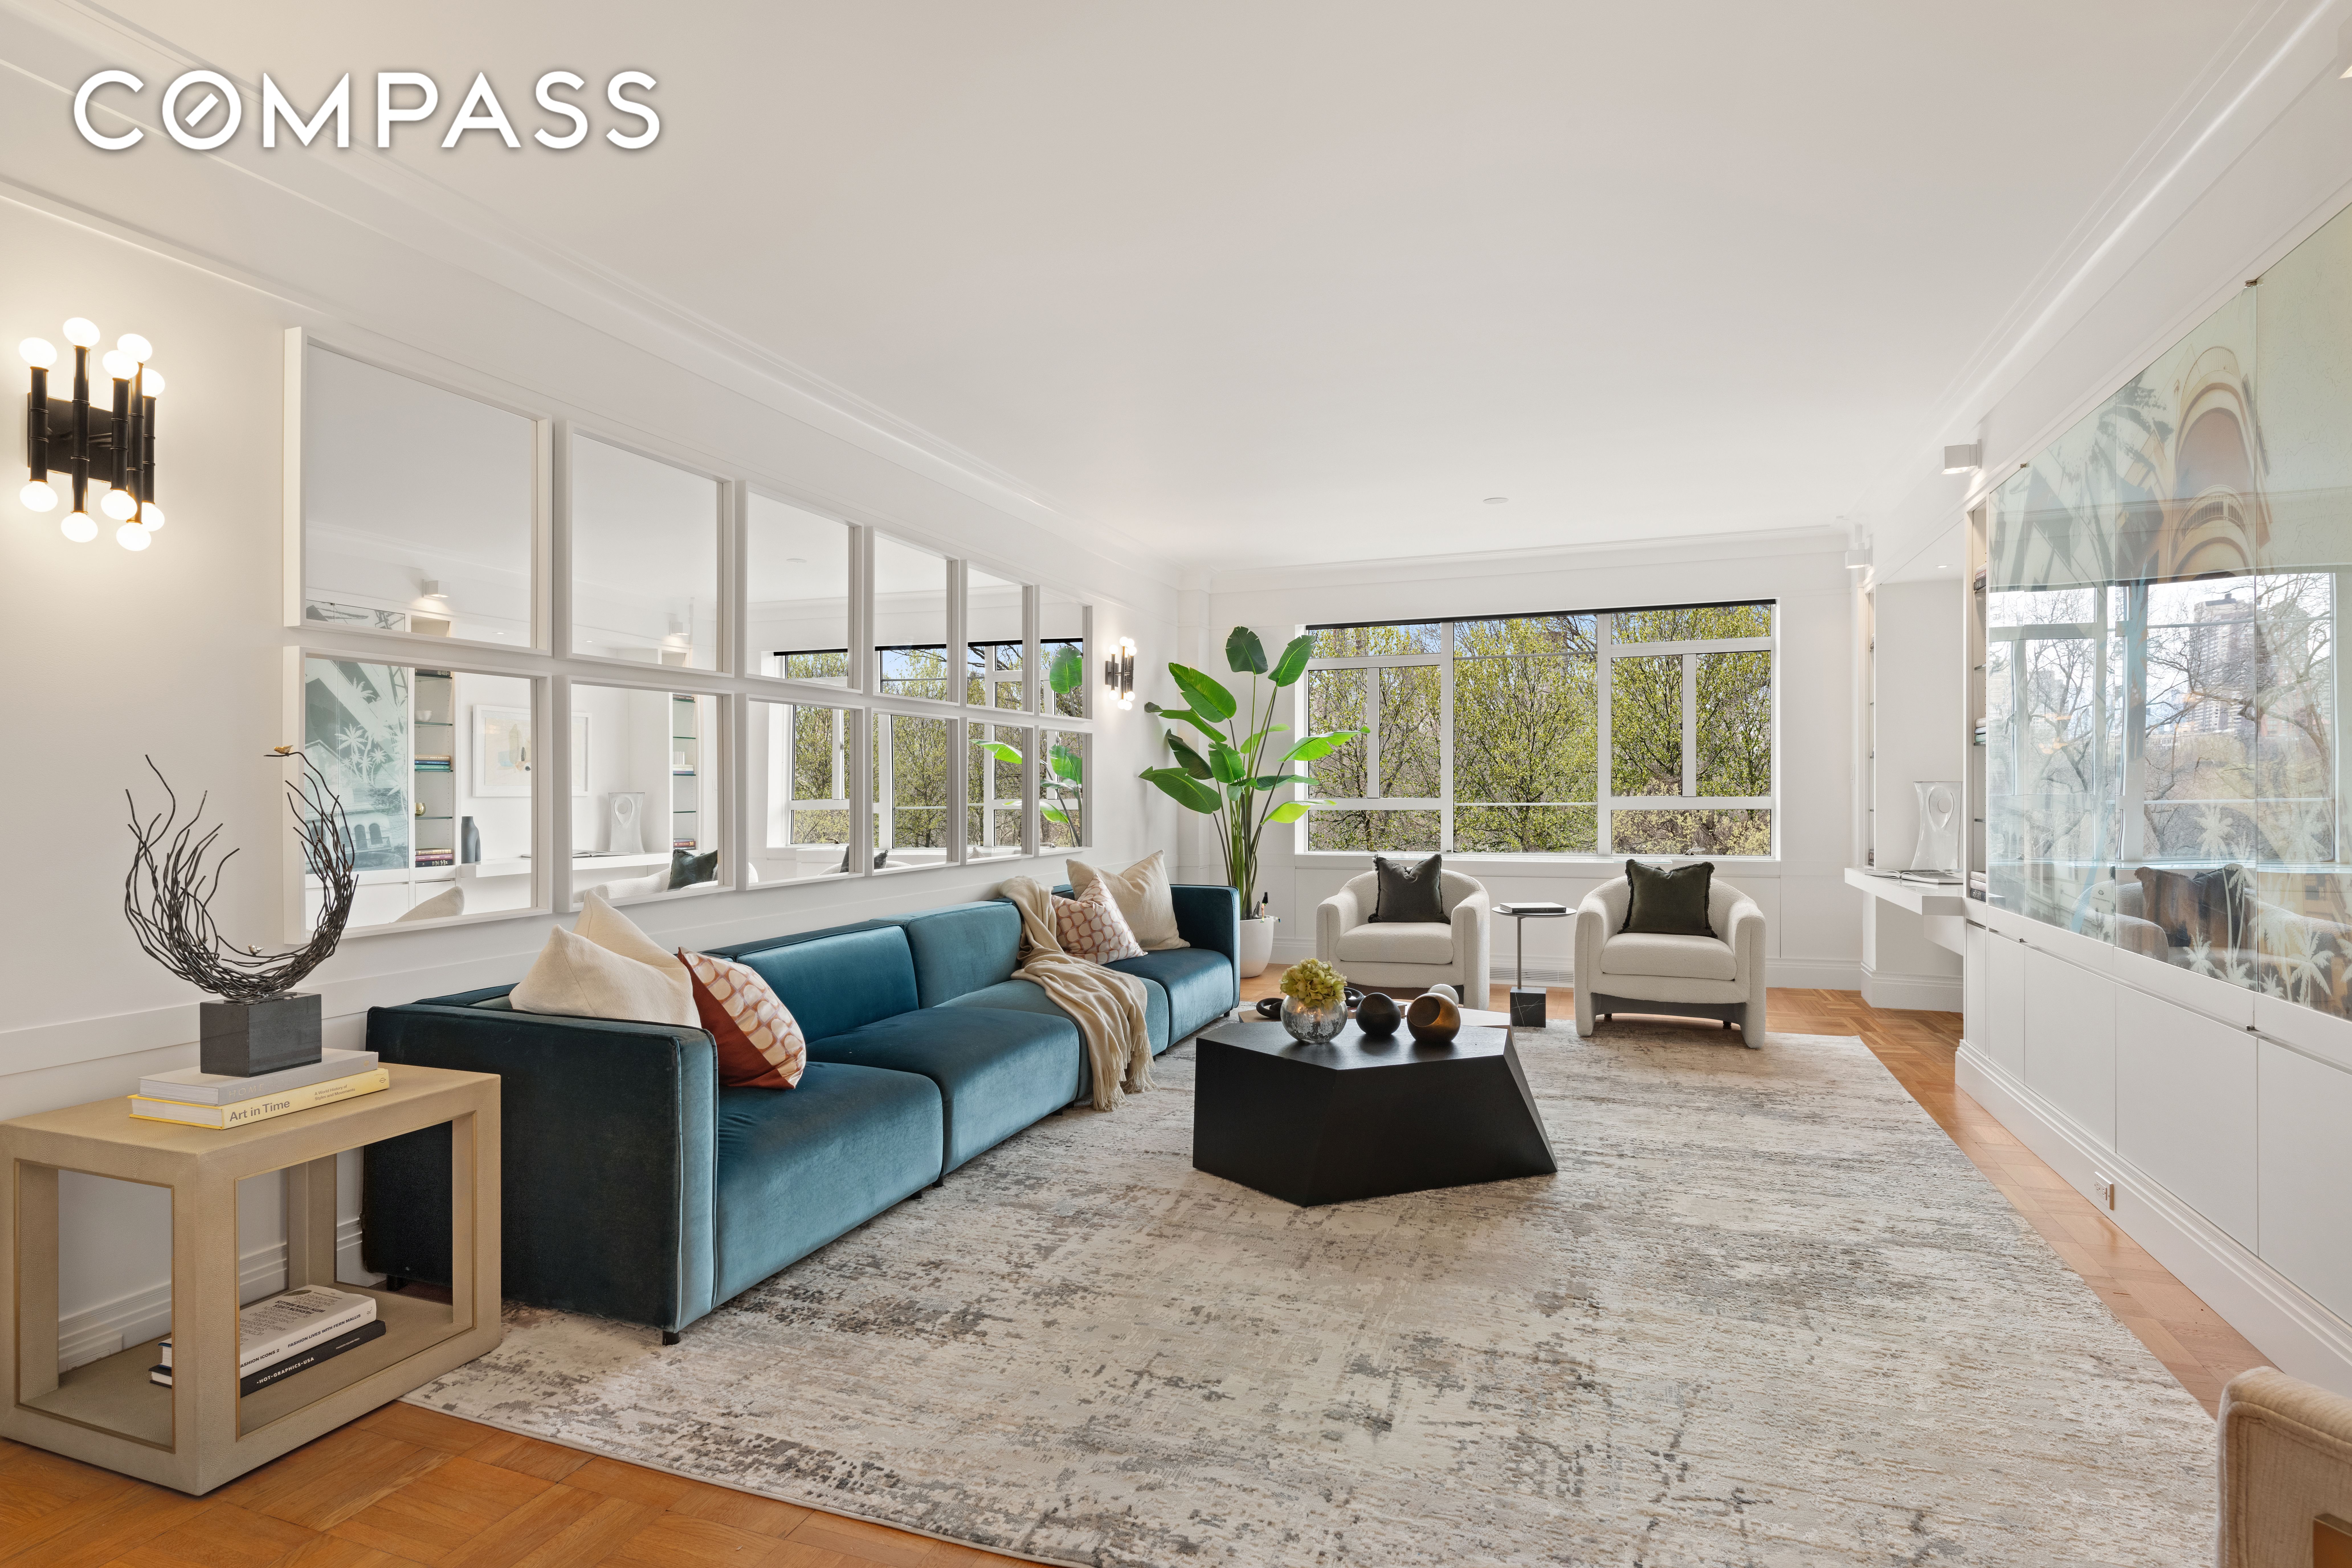 870 5th Avenue 8A, Upper East Side, Upper East Side, NYC - 3 Bedrooms  
3.5 Bathrooms  
6 Rooms - 